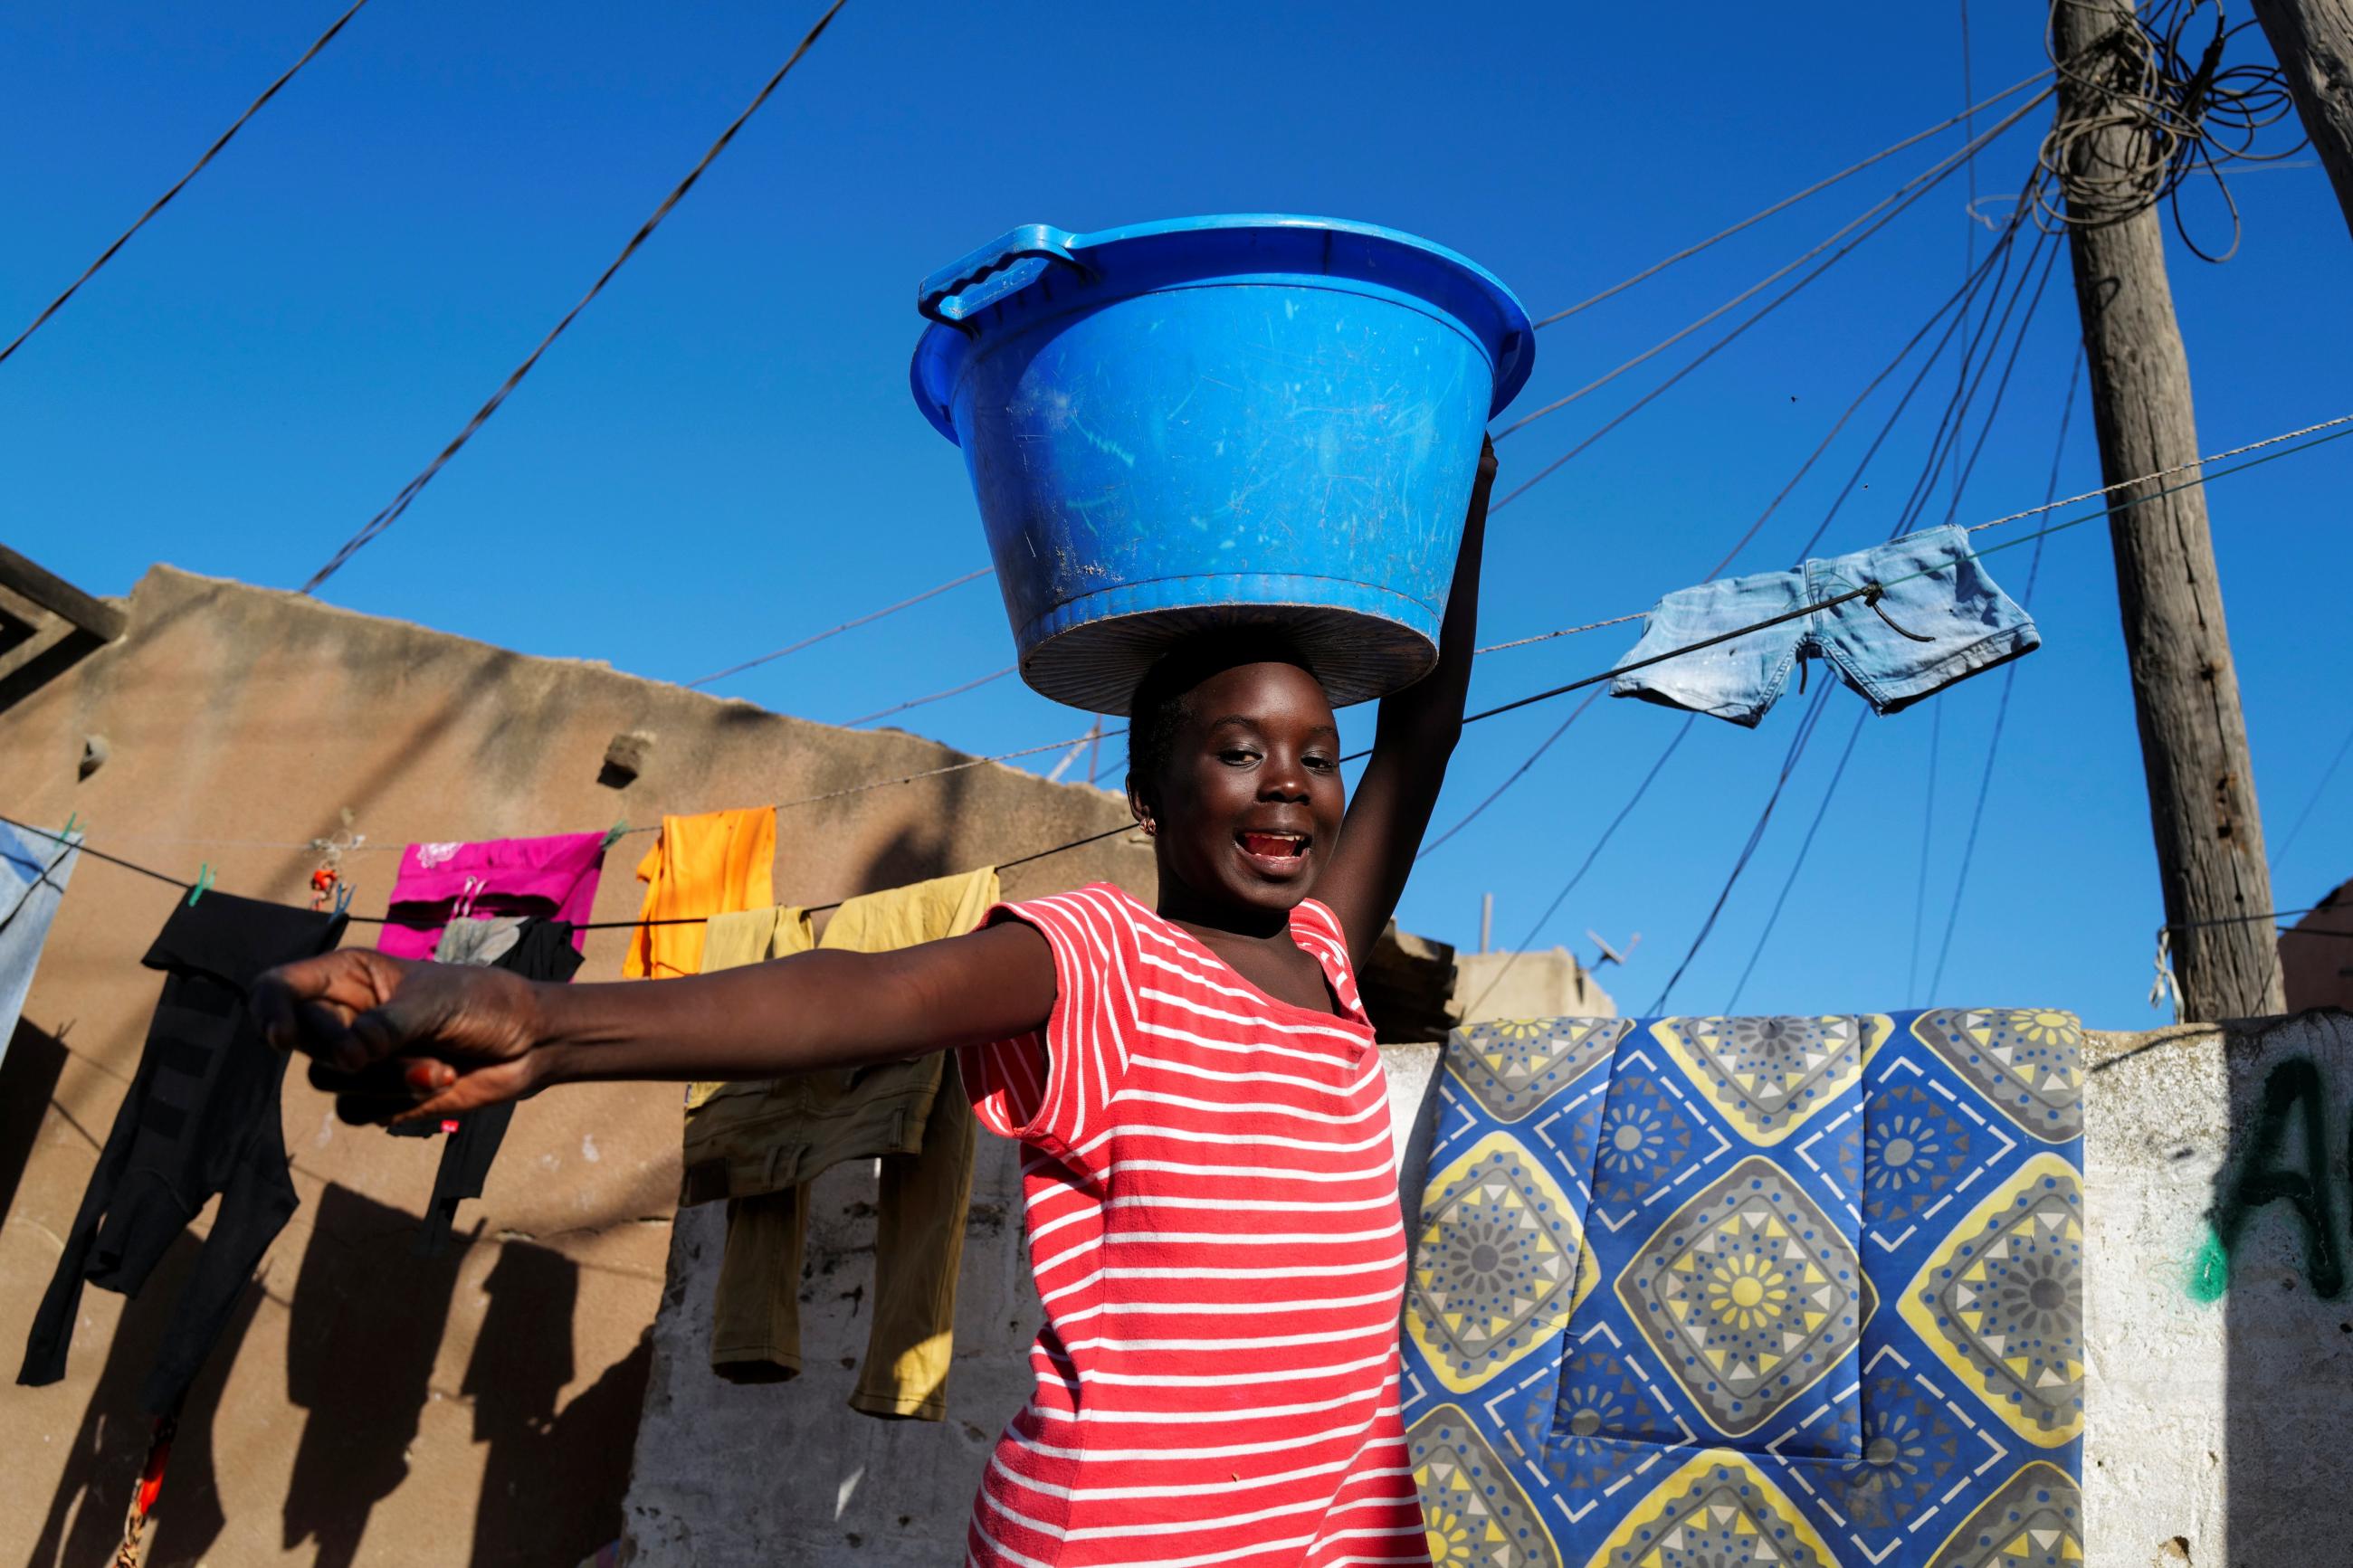 A girl carries a bucket with laundry on her head while heading home as the spread of the coronavirus disease continues, in Yoff neighbourhood, Dakar, Senegal on January 26, 2021.